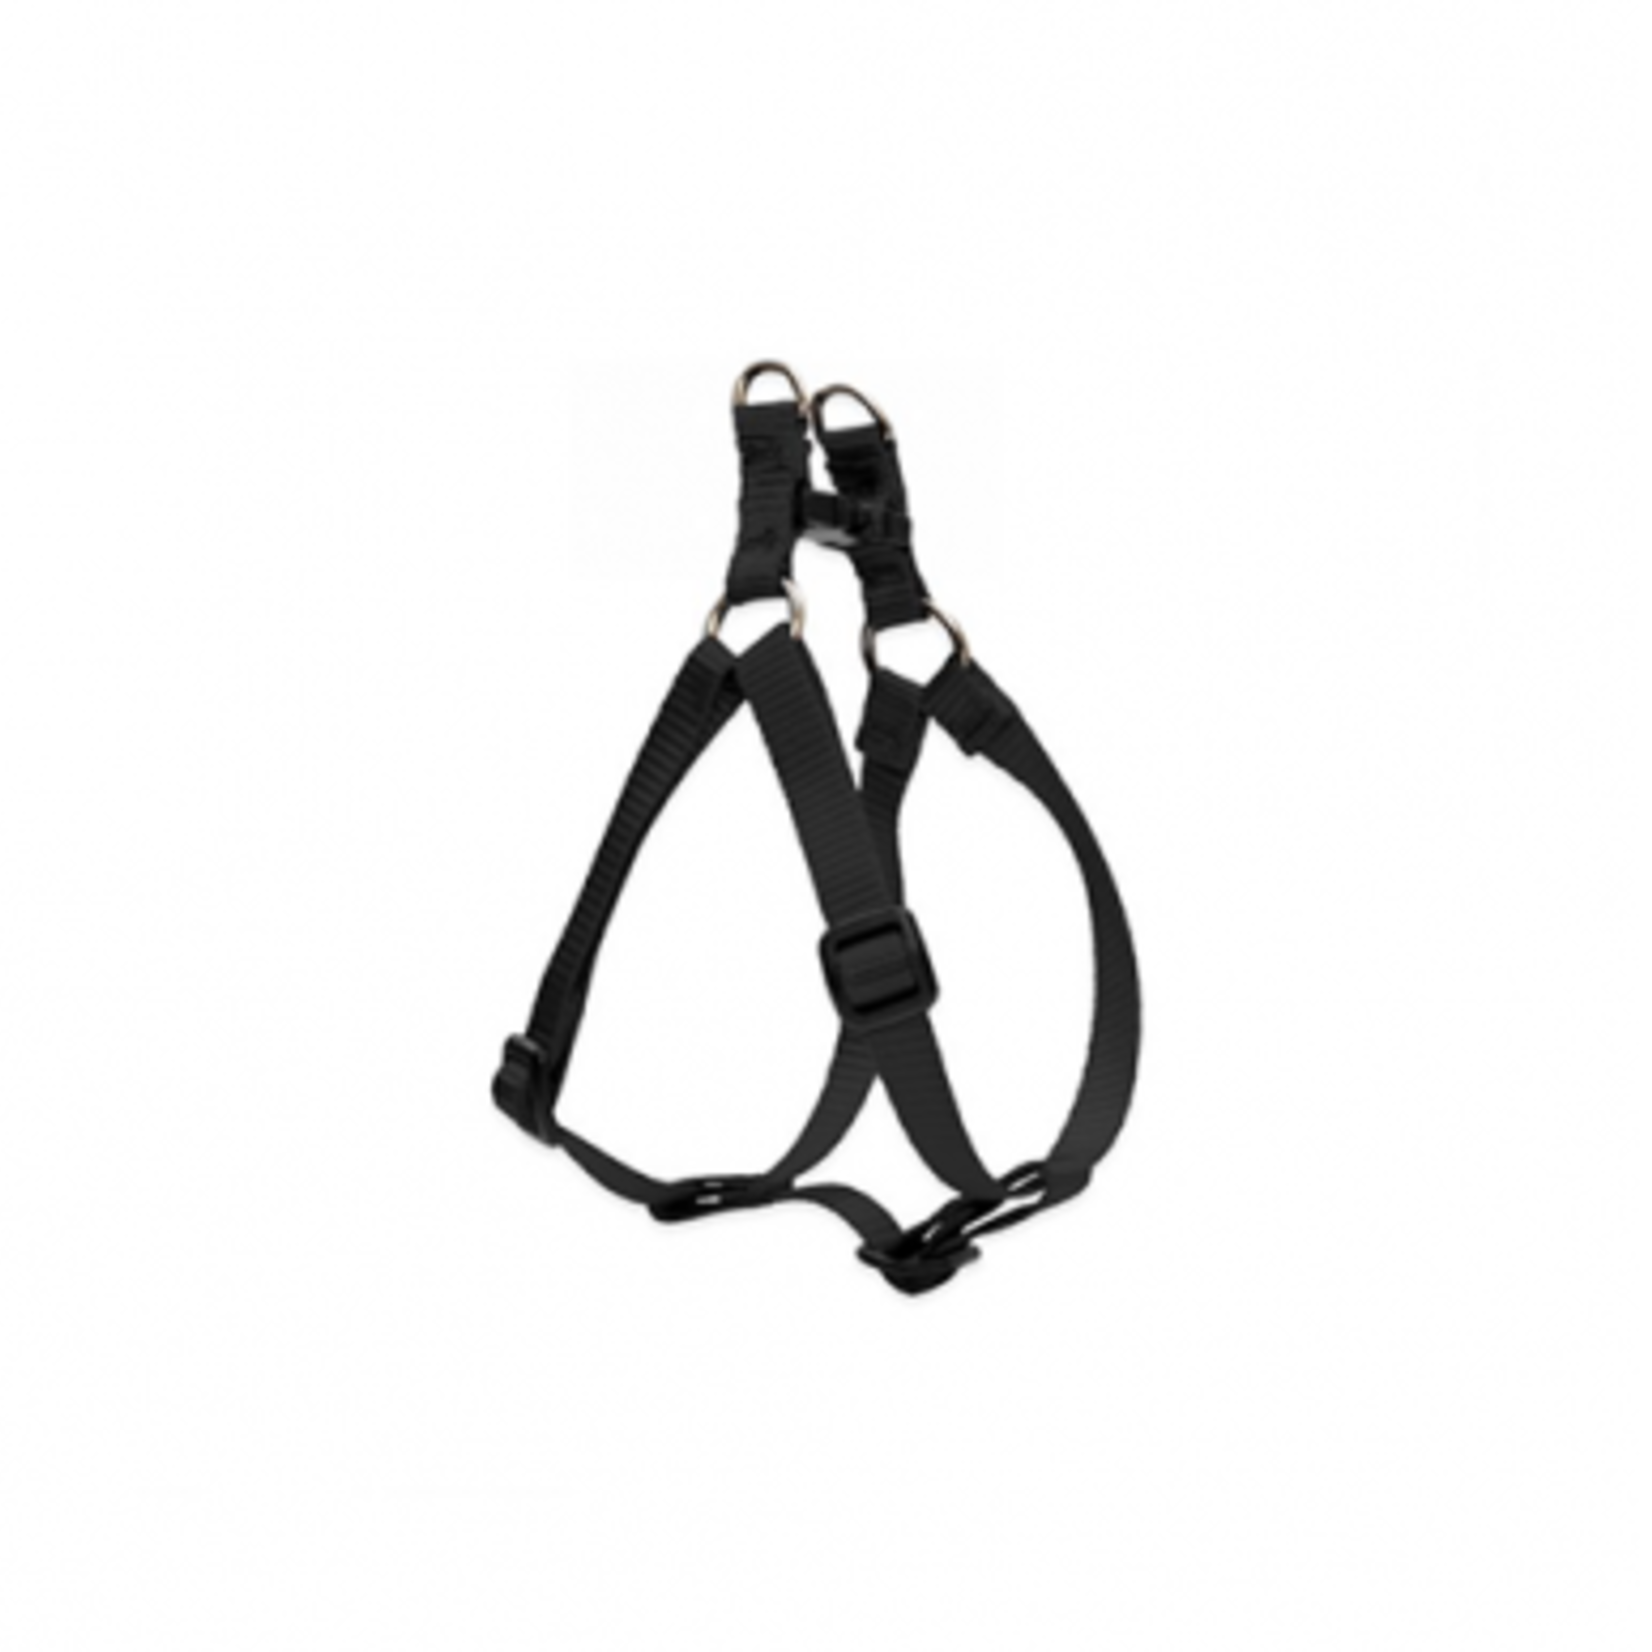 LupinePet Step-In Adjustable Harness - Black - 1/2 X 10 in to 13 in